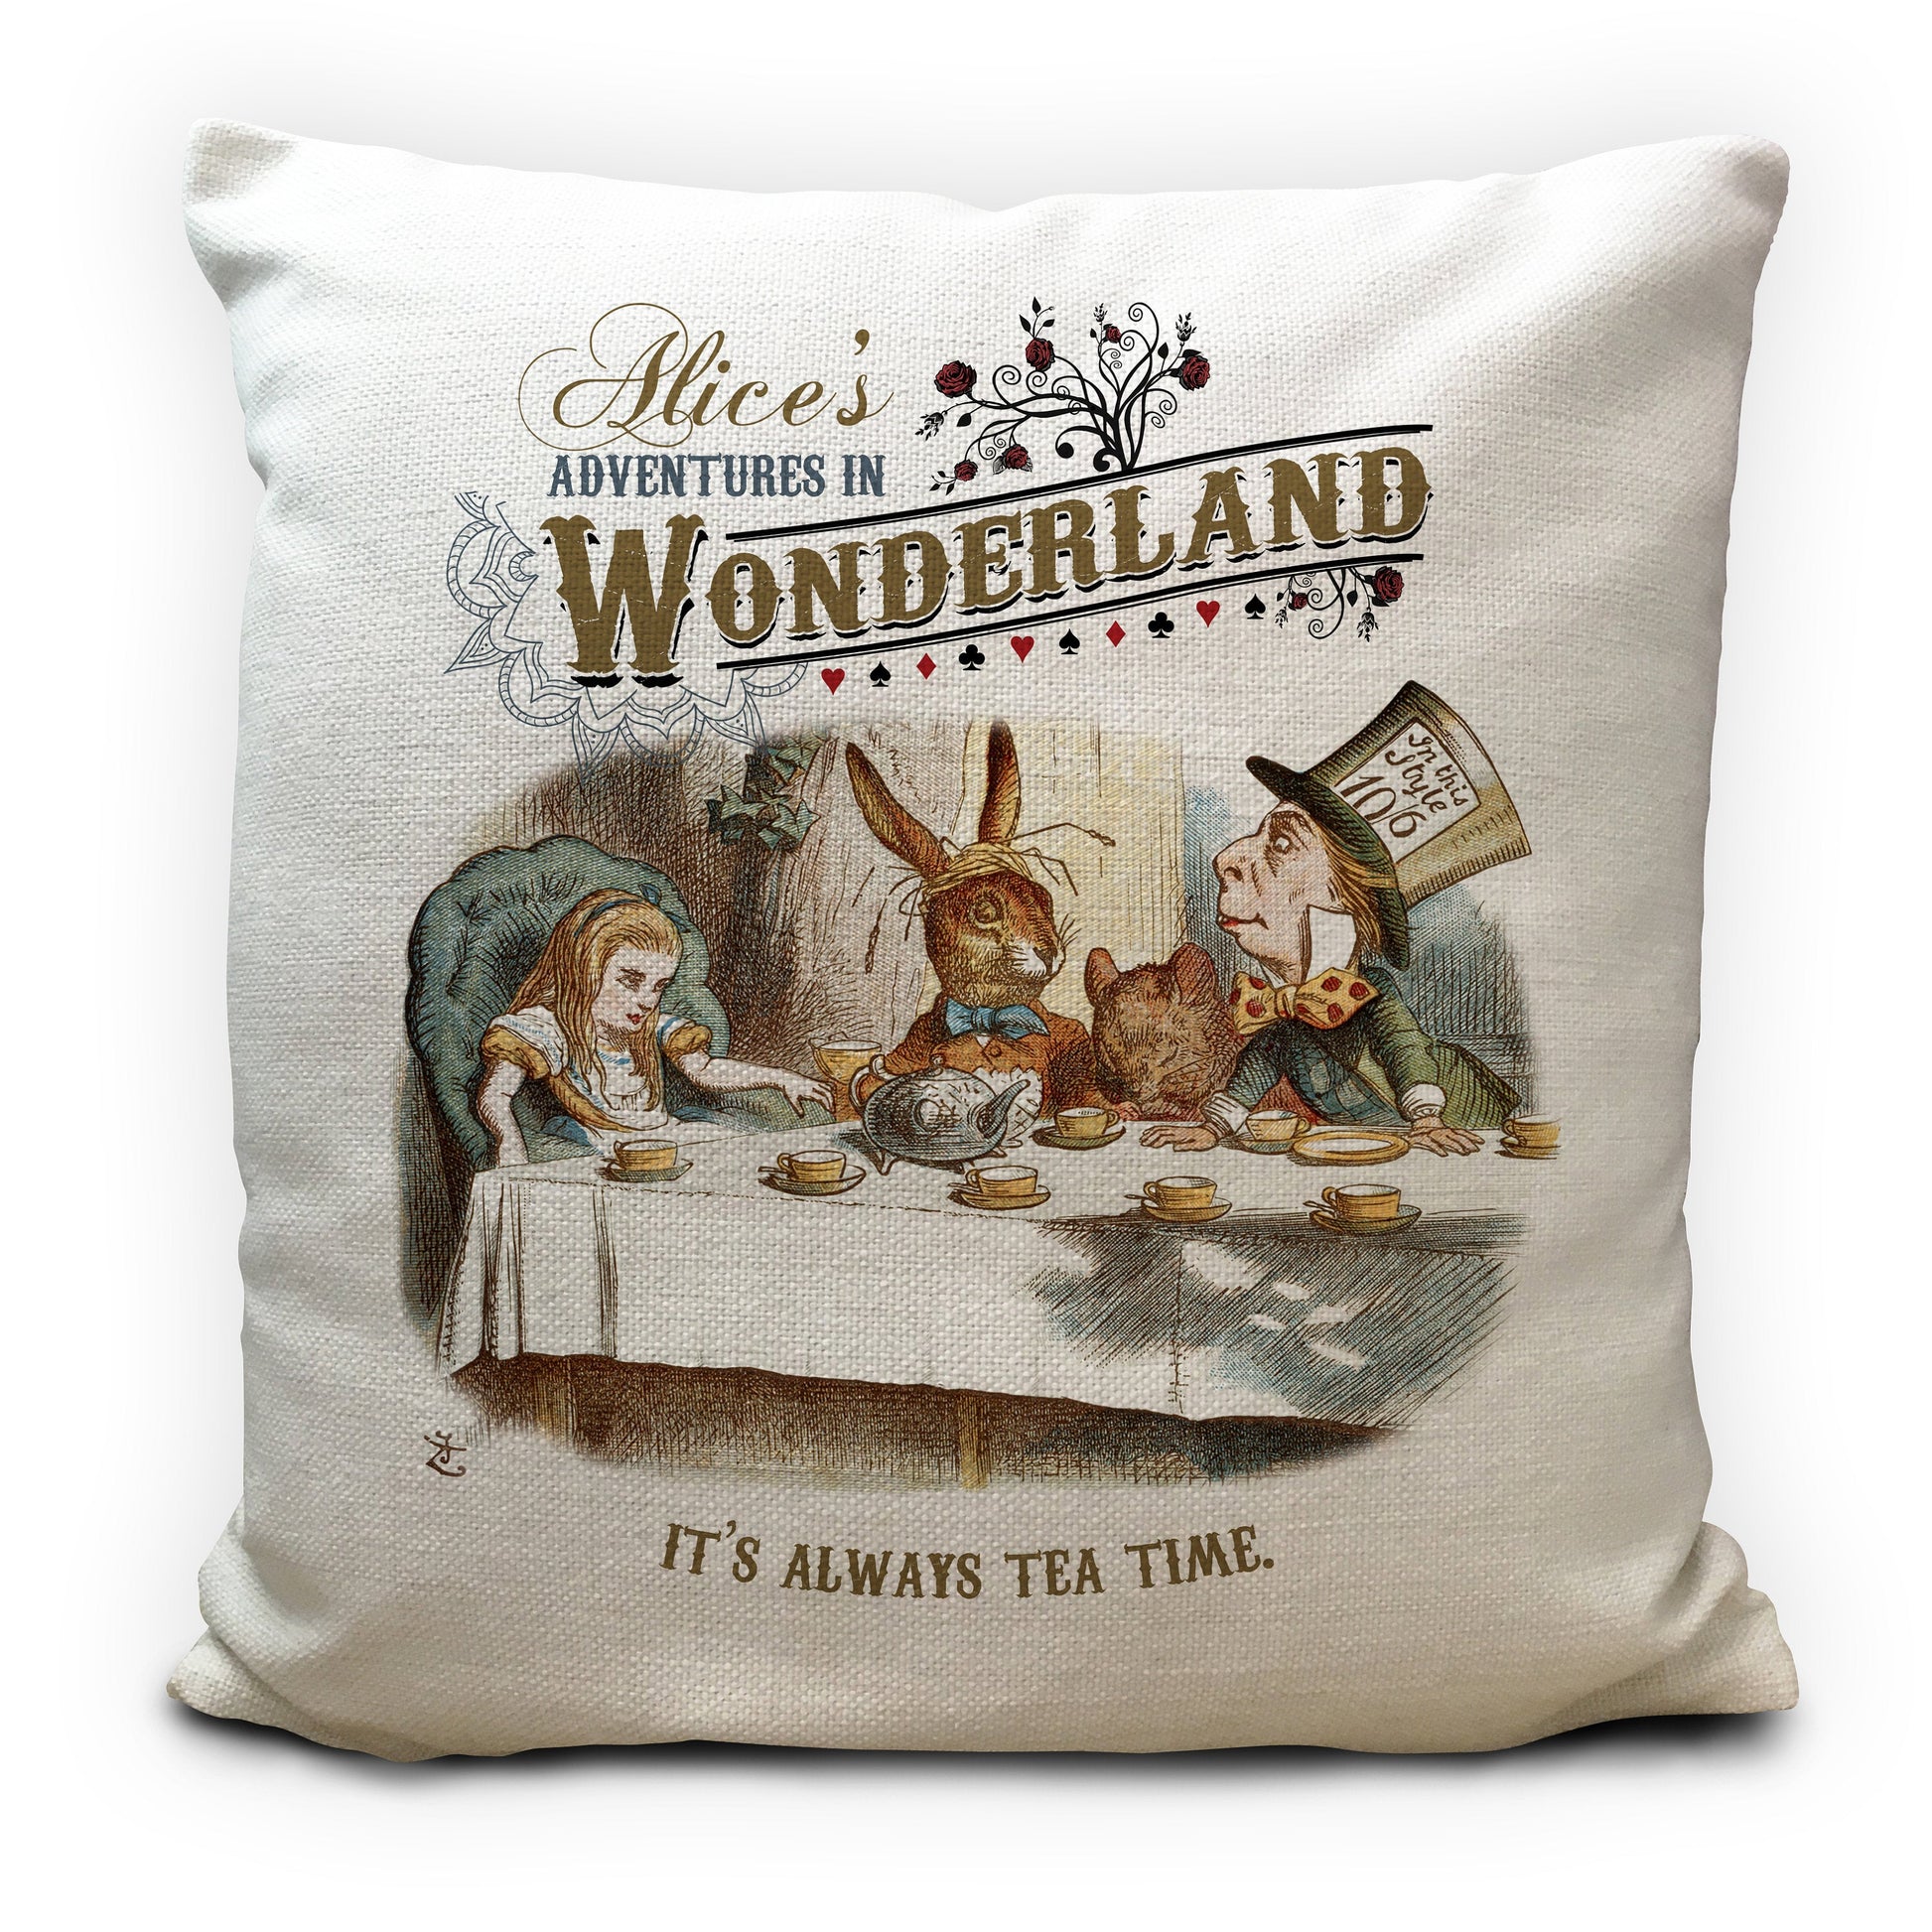 Alice in wonderland cushion cover with traditional tea party illustration